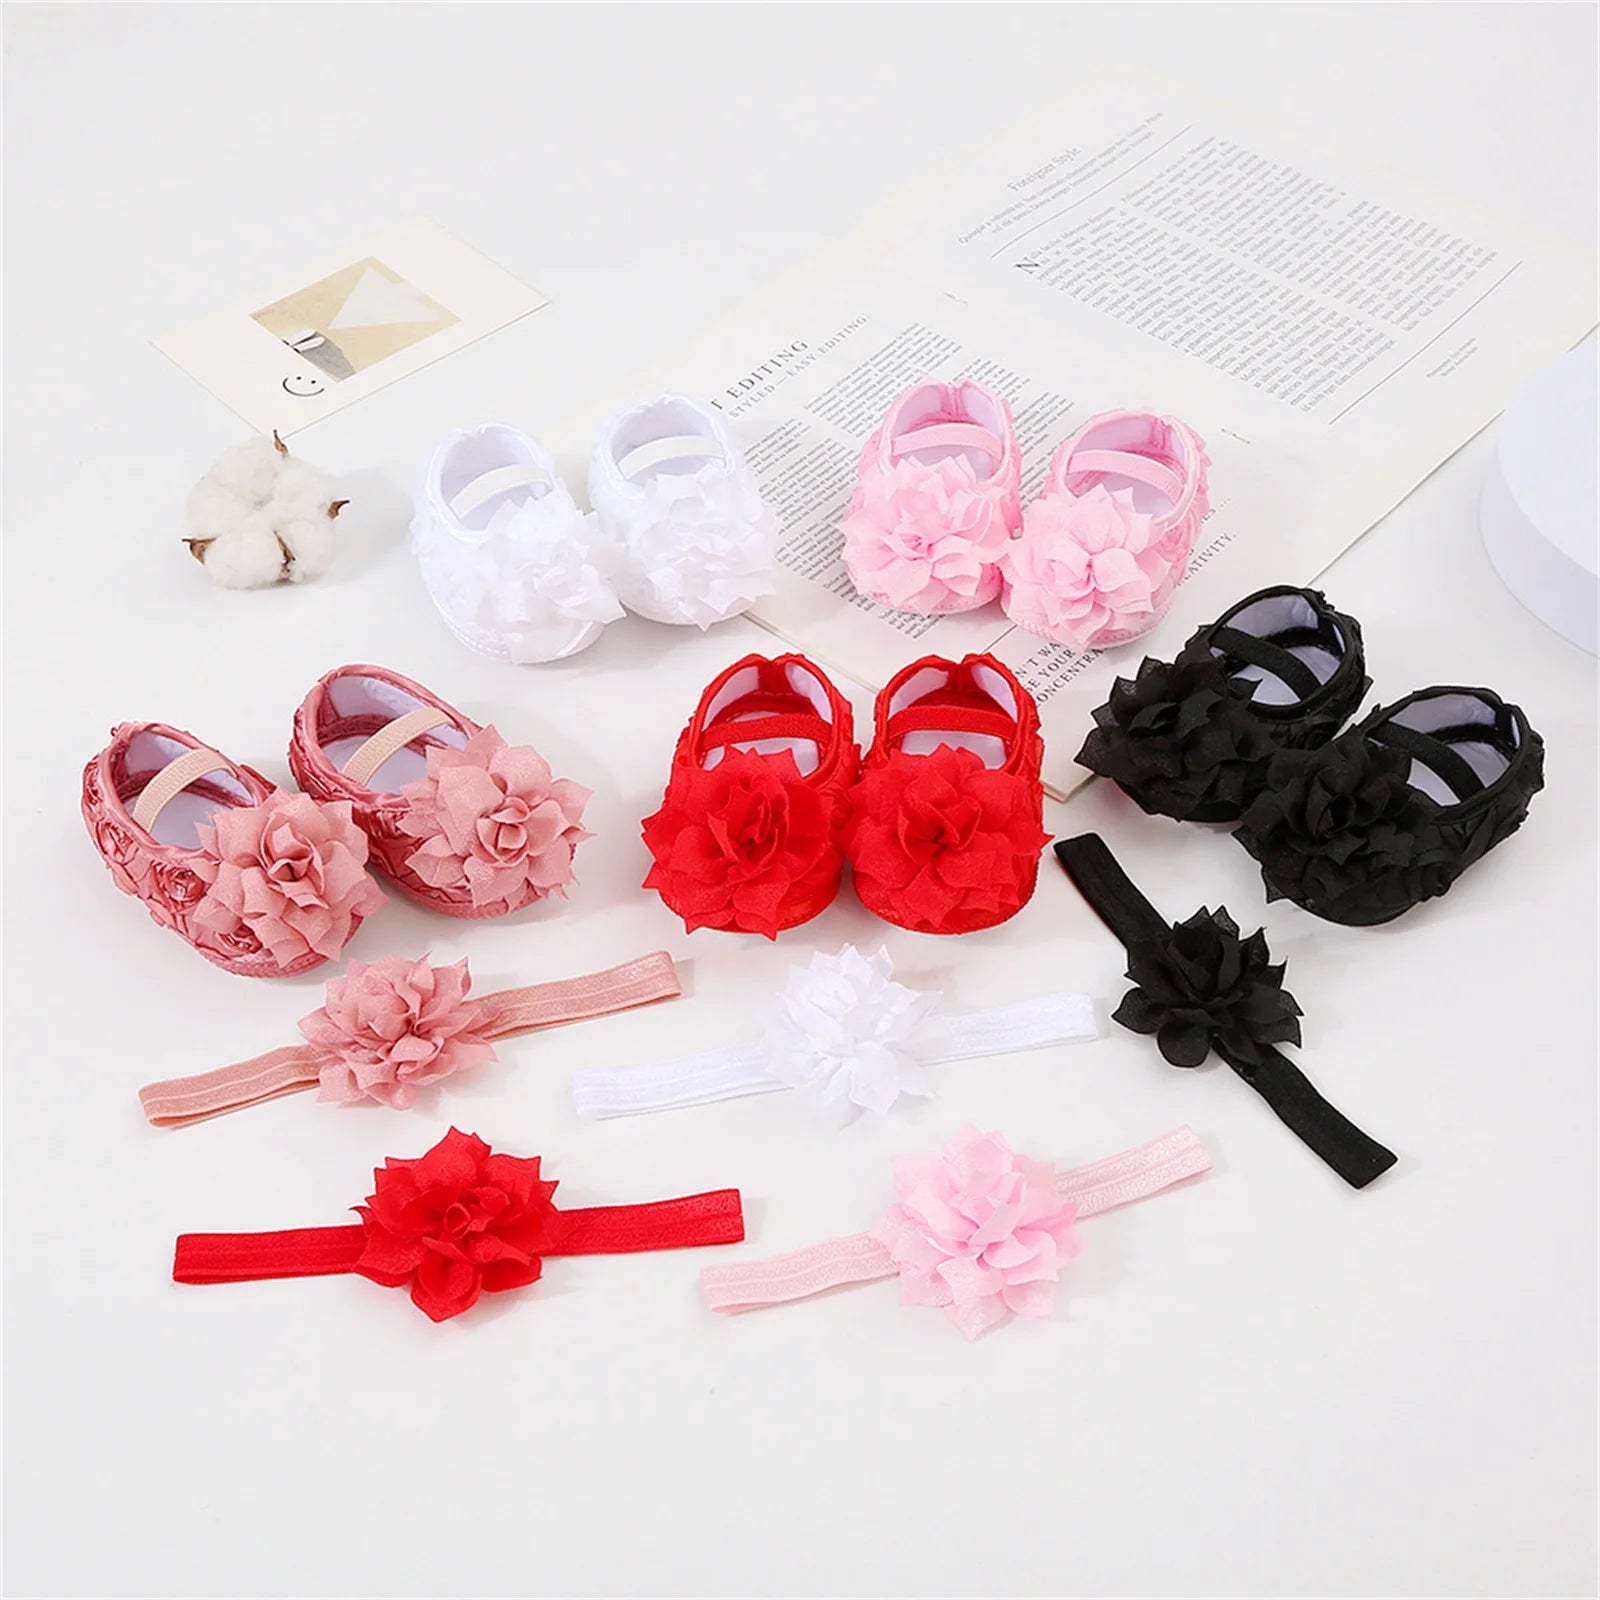 Pudcoco Baby Girls Princess Shoes Flower Mary Jane Flats Dress Walking Shoes and Cute Headband for Newborn Infant Toddler 0-12M